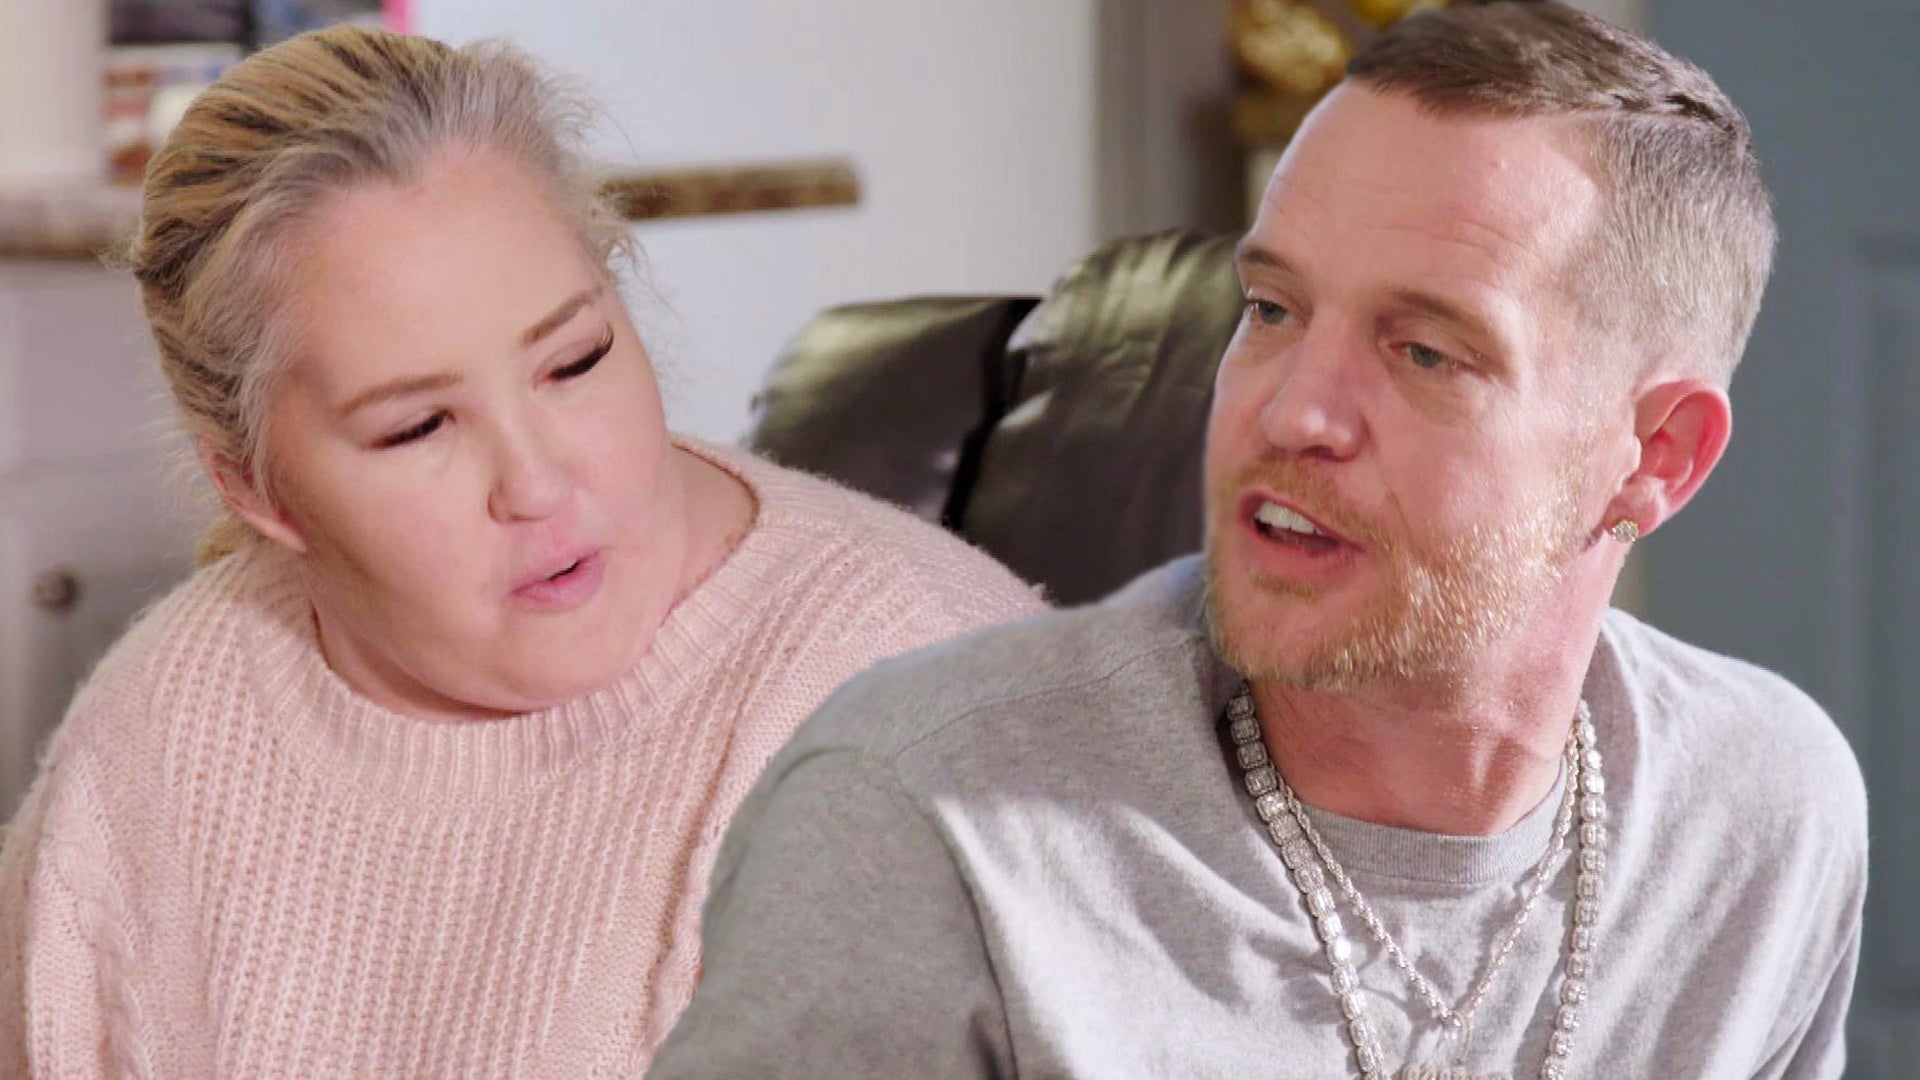 Mama June’s Husband Justin Confronts Her Over Not Loving or Respecting Him (Exclusive)